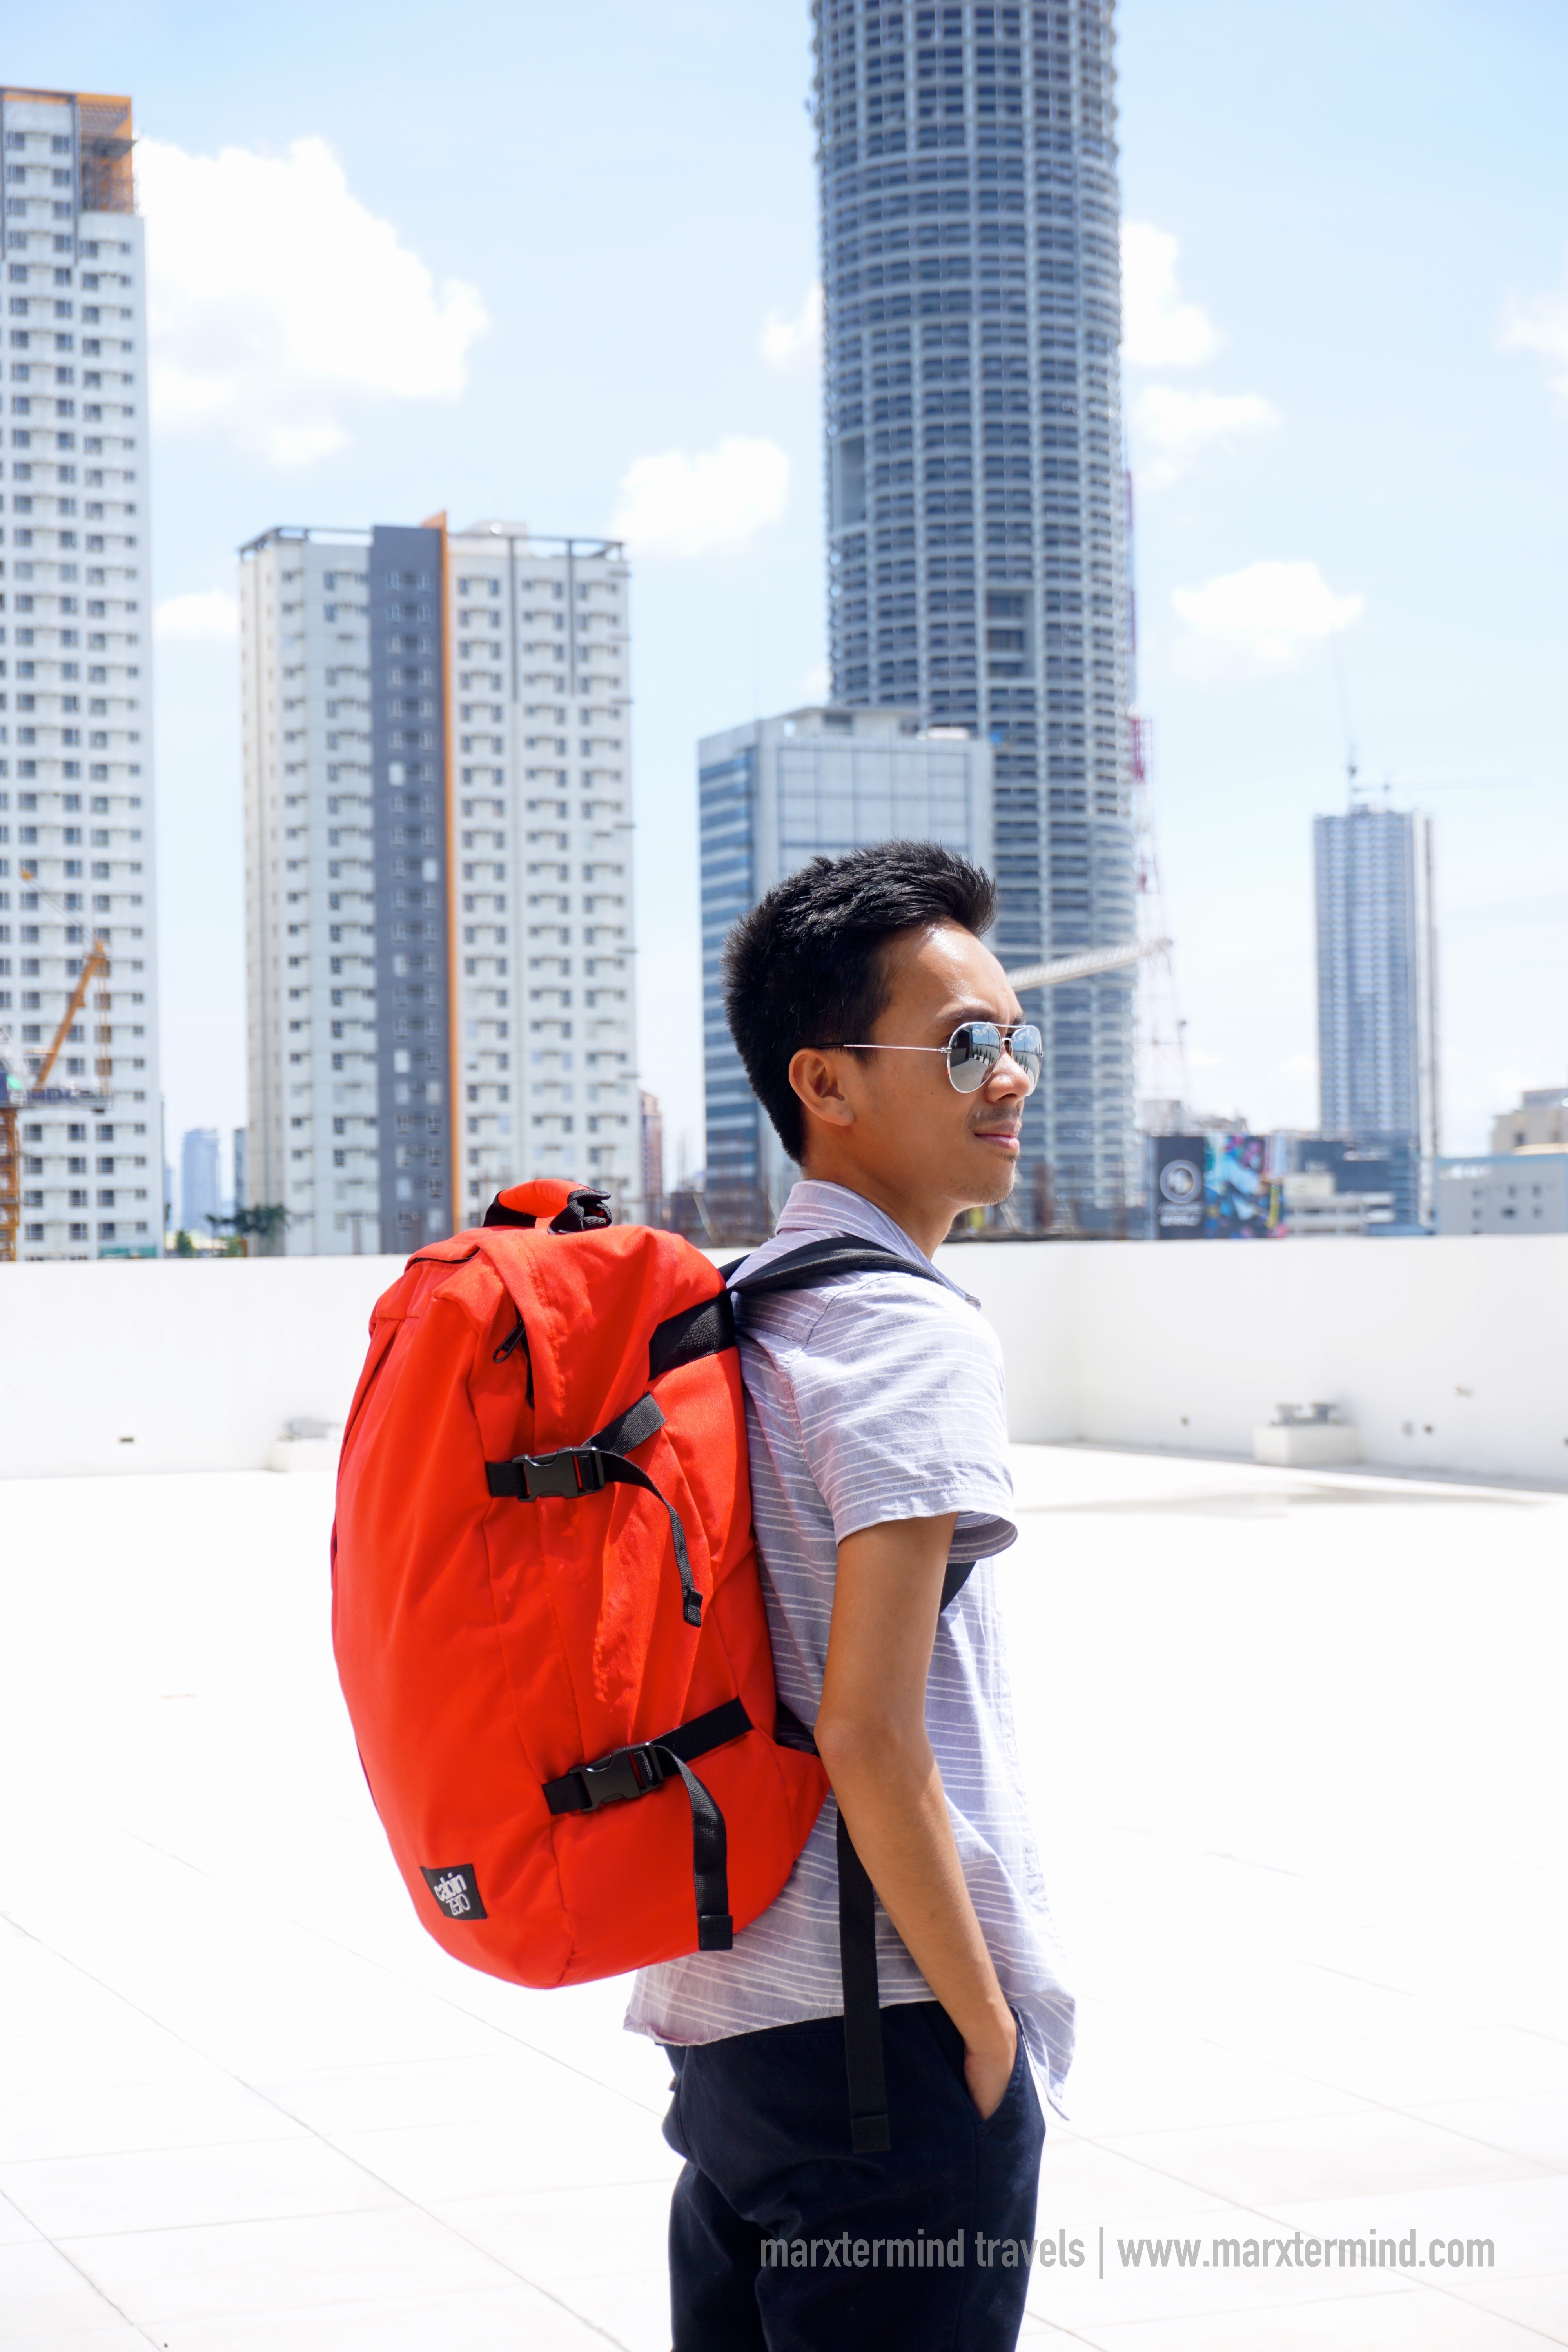 Cabin Zero Classic Backpack 36 Review (Minimalist Carry-on Backpack) 